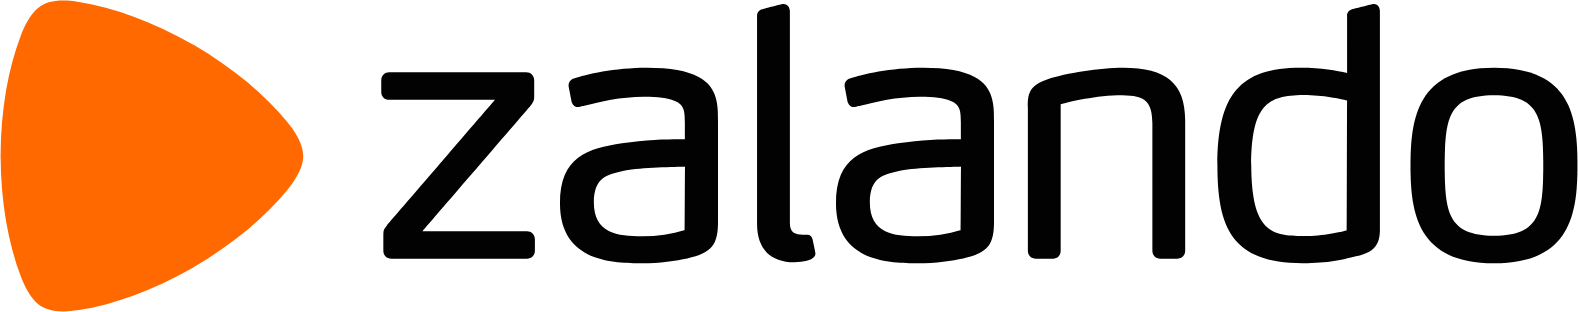 Zalando logo in transparent PNG and vectorized SVG formats